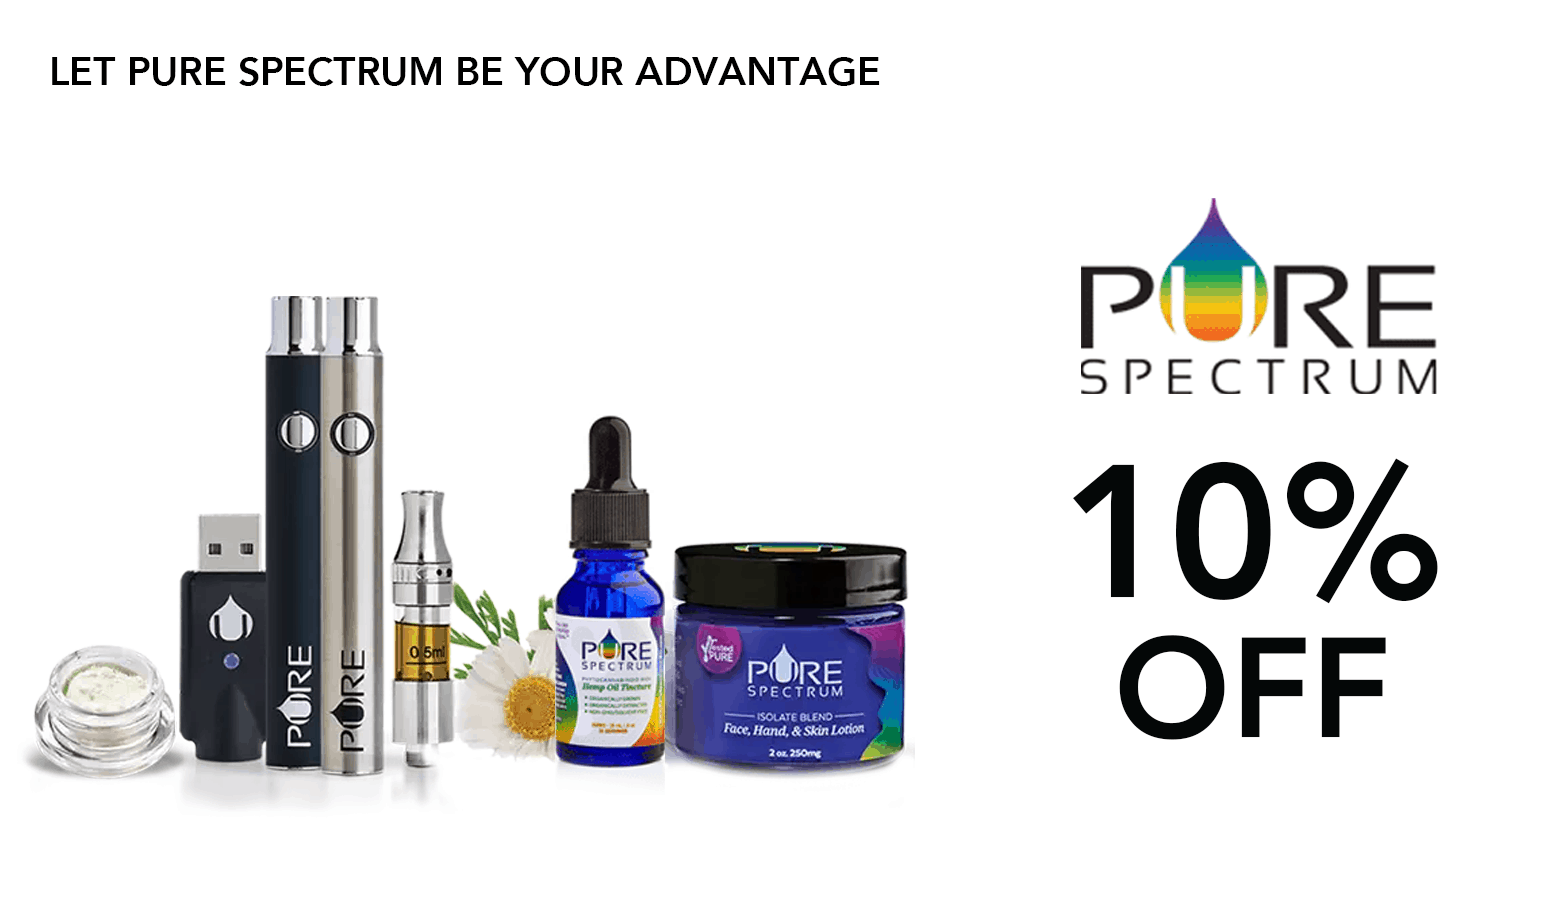 Pure Spectrum CBD Coupon Code - Online Discount - Save On Cannabis